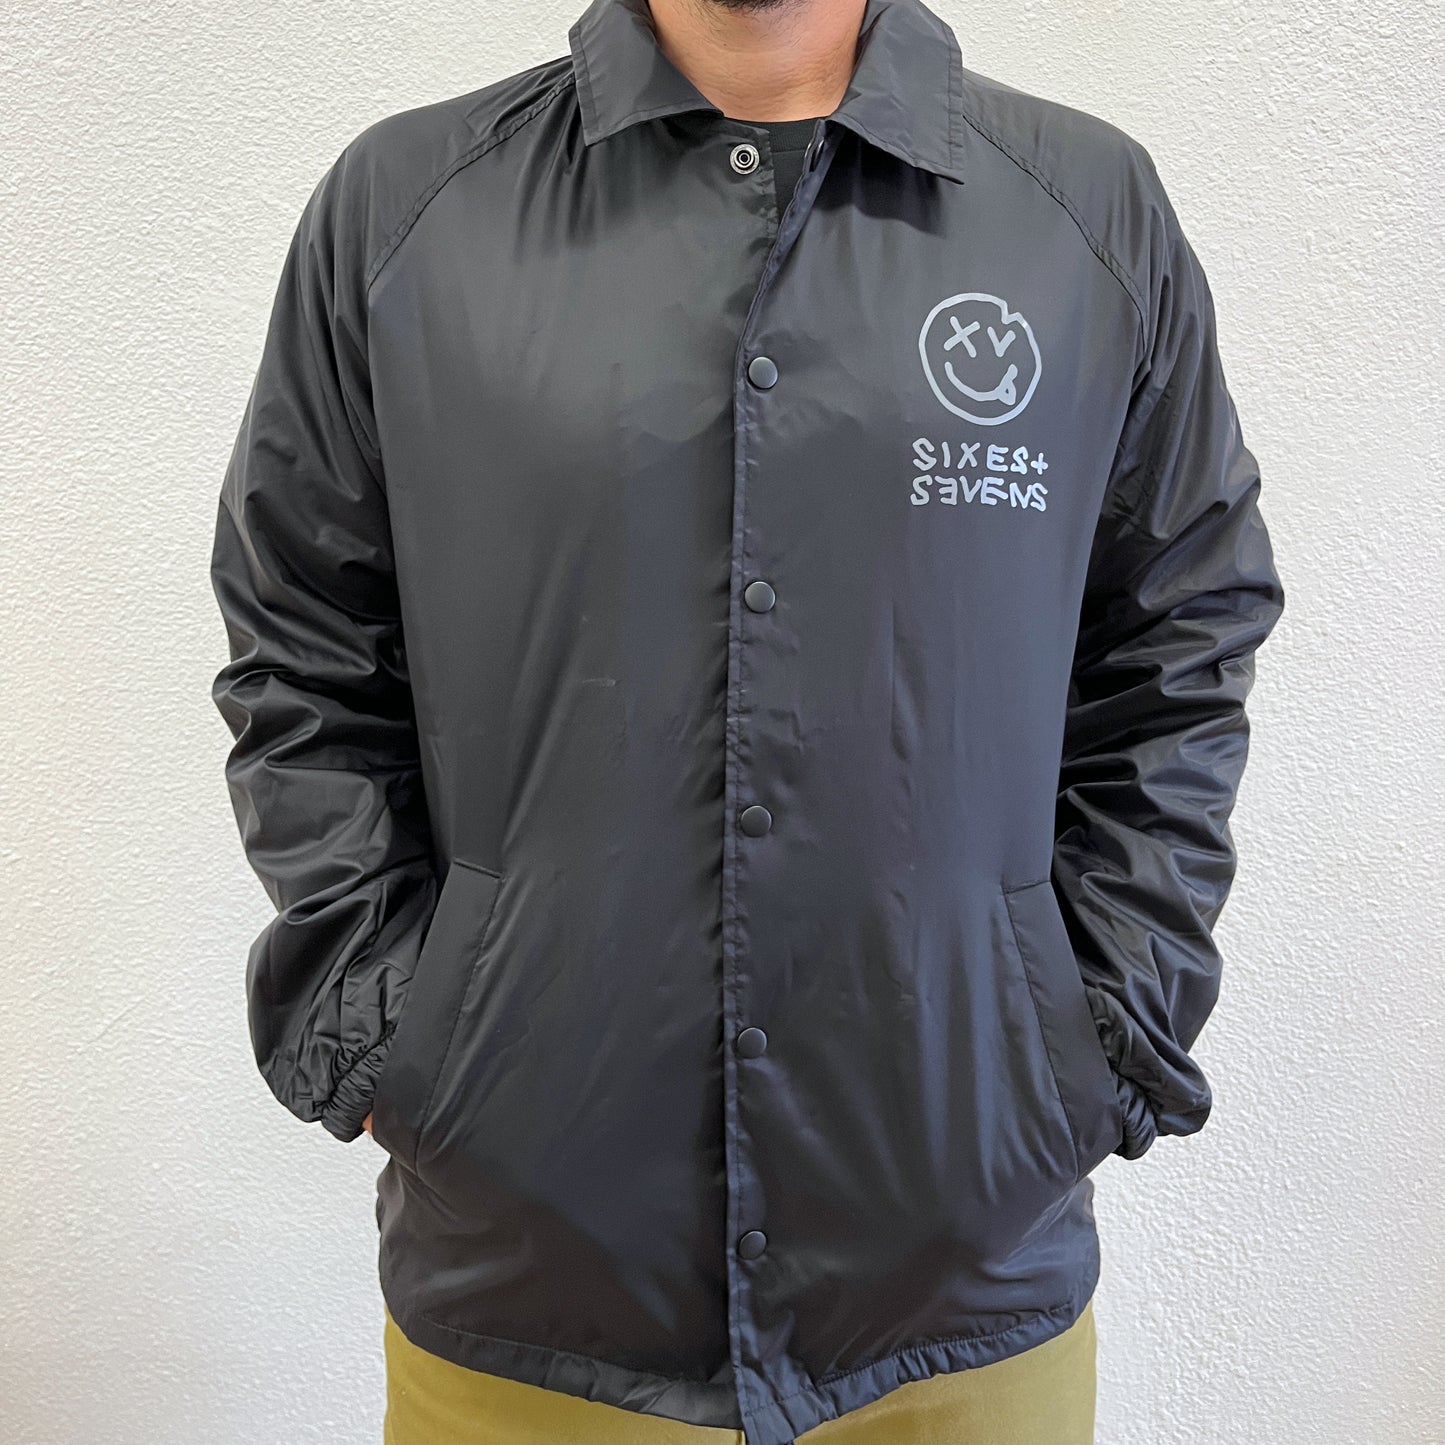 Sixes and Sevens - All Smiles Coaches Jacket